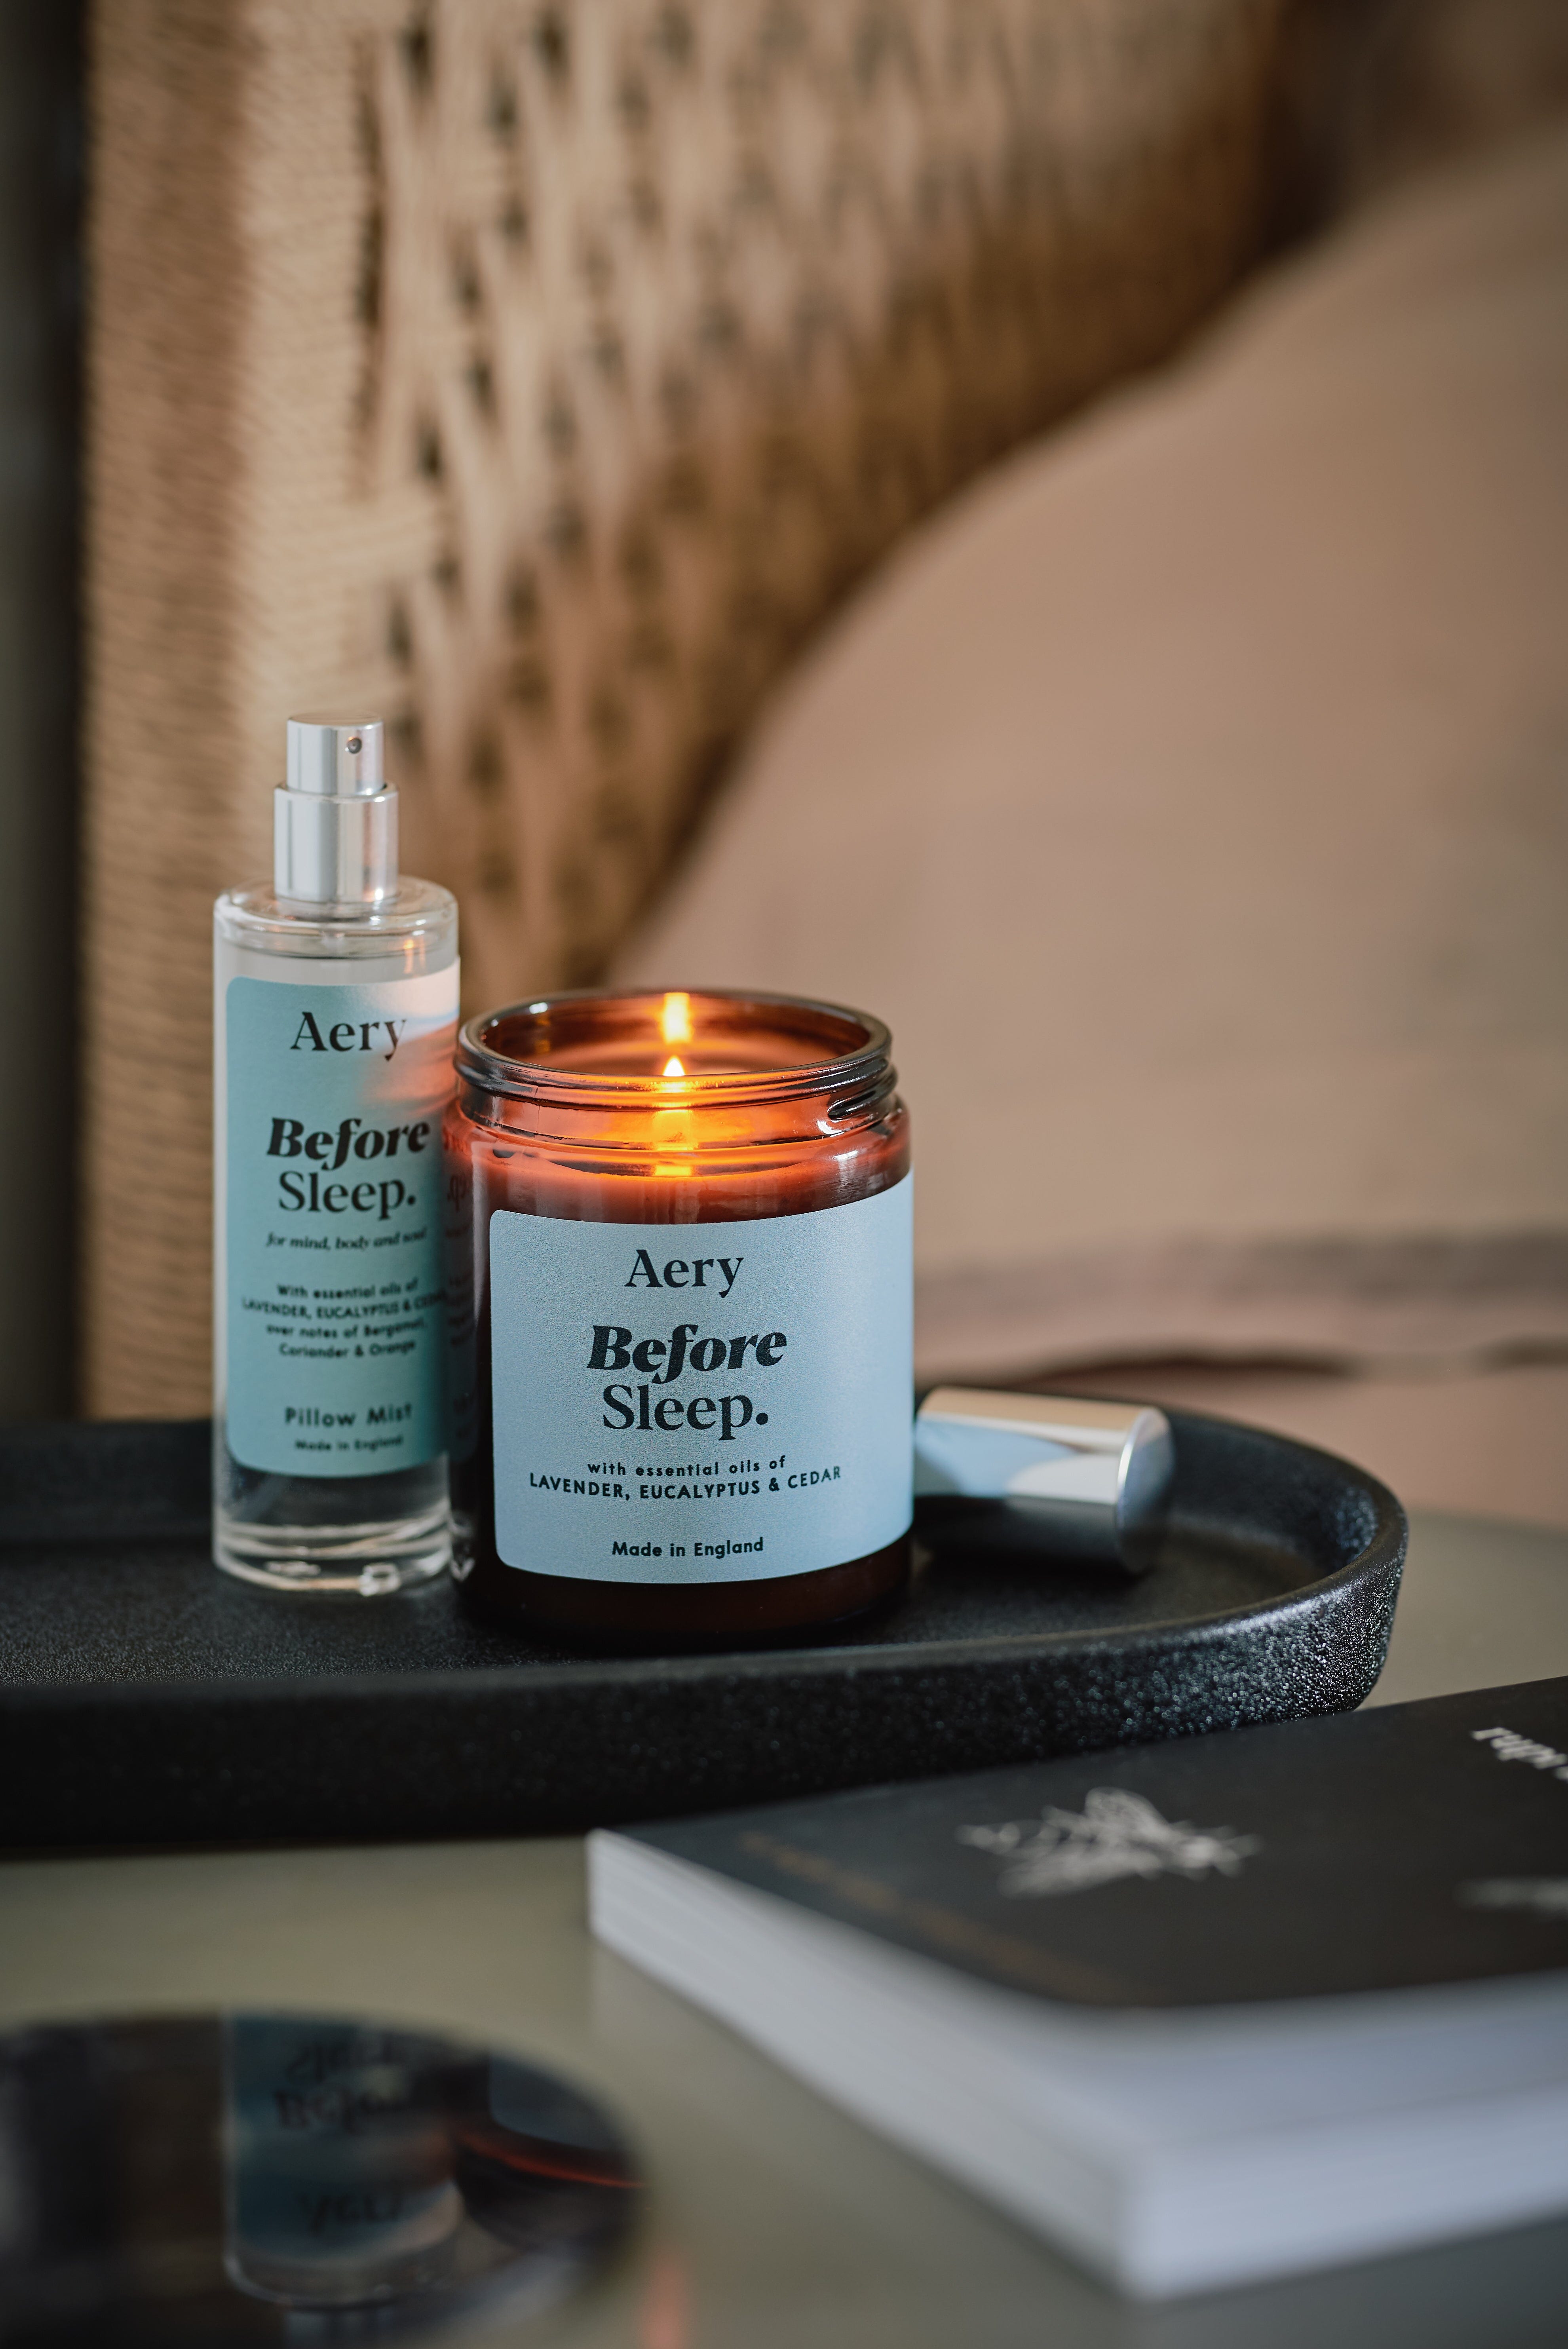 Blue Before Sleep pillow mist displayed by Aery displayed next to Before Sleep jar candle on bedside table 